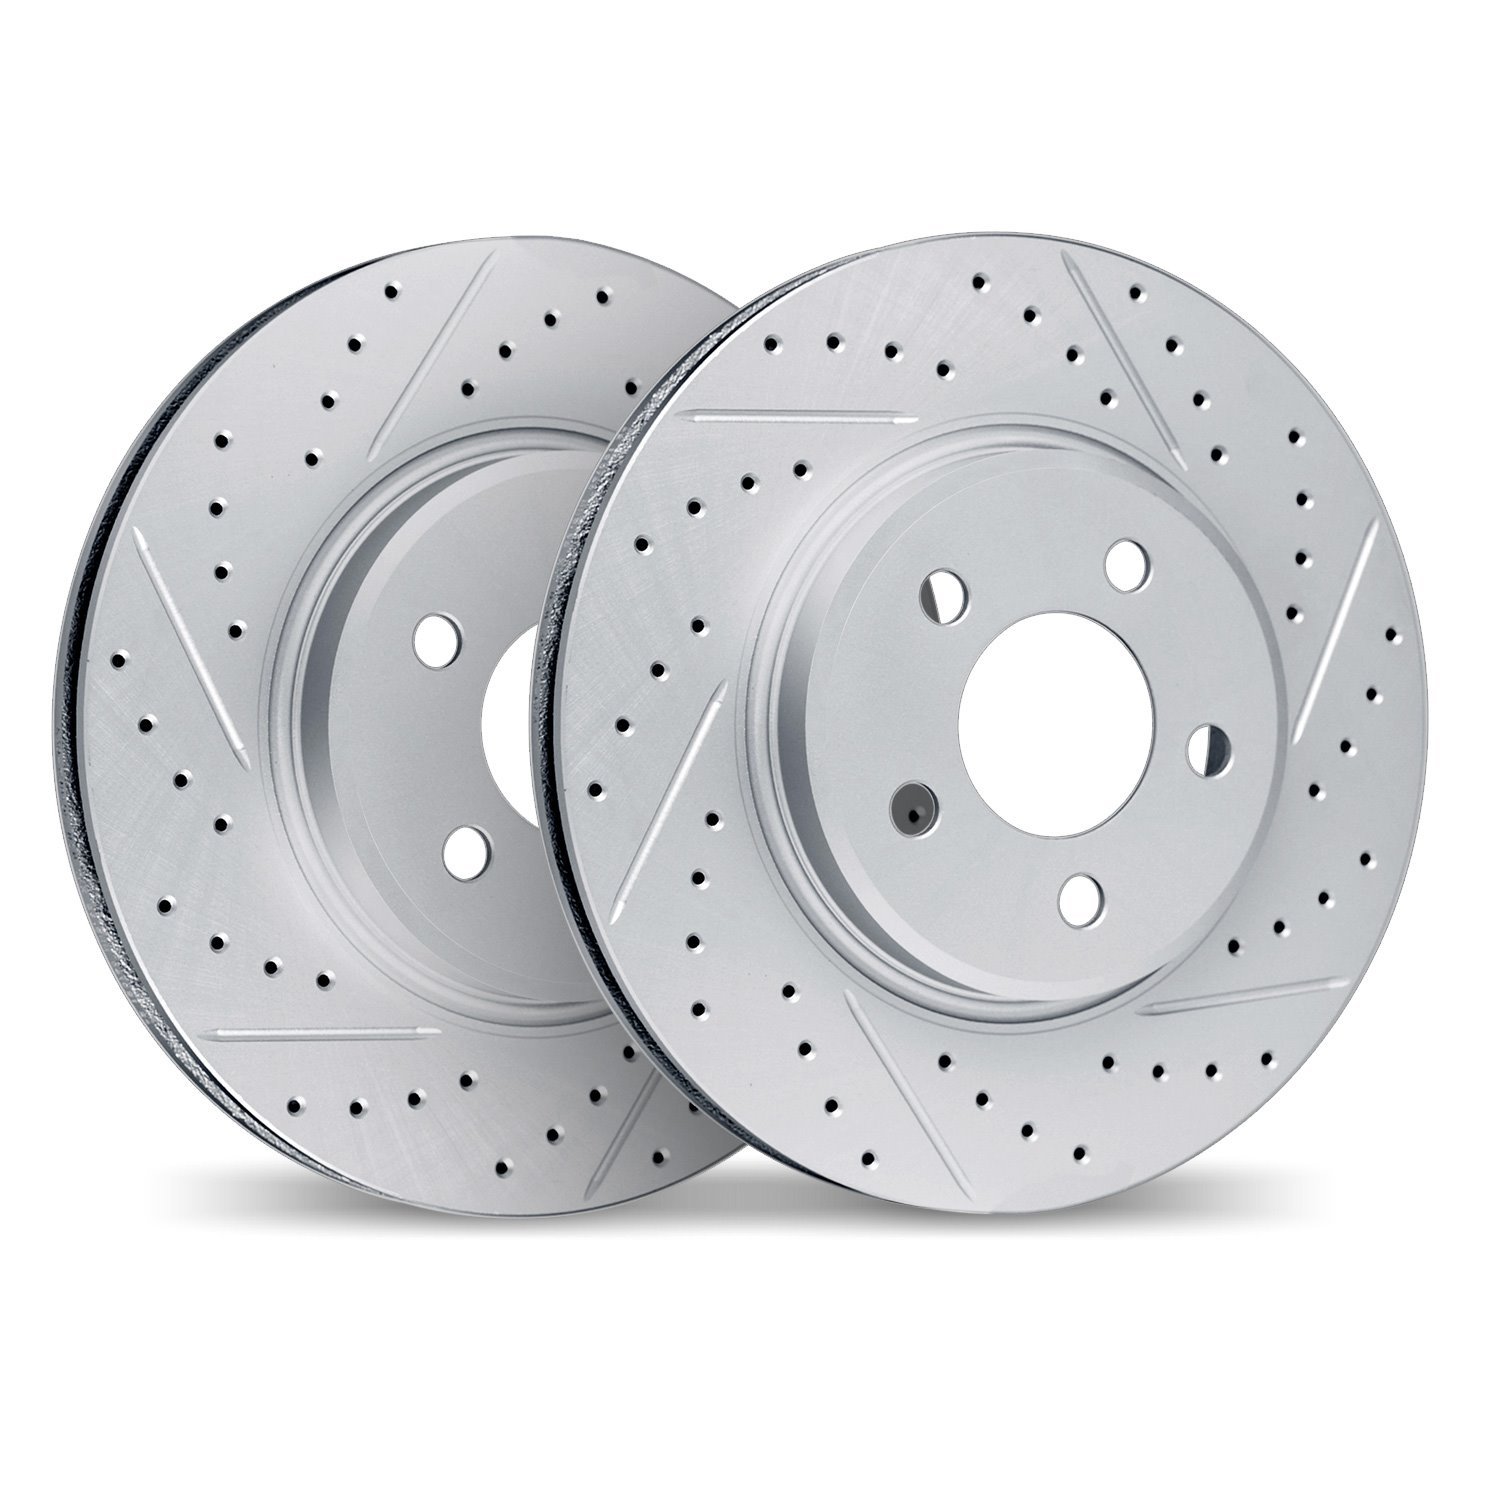 2002-54002 Geoperformance Drilled/Slotted Brake Rotors, 1976-1993 Ford/Lincoln/Mercury/Mazda, Position: Front